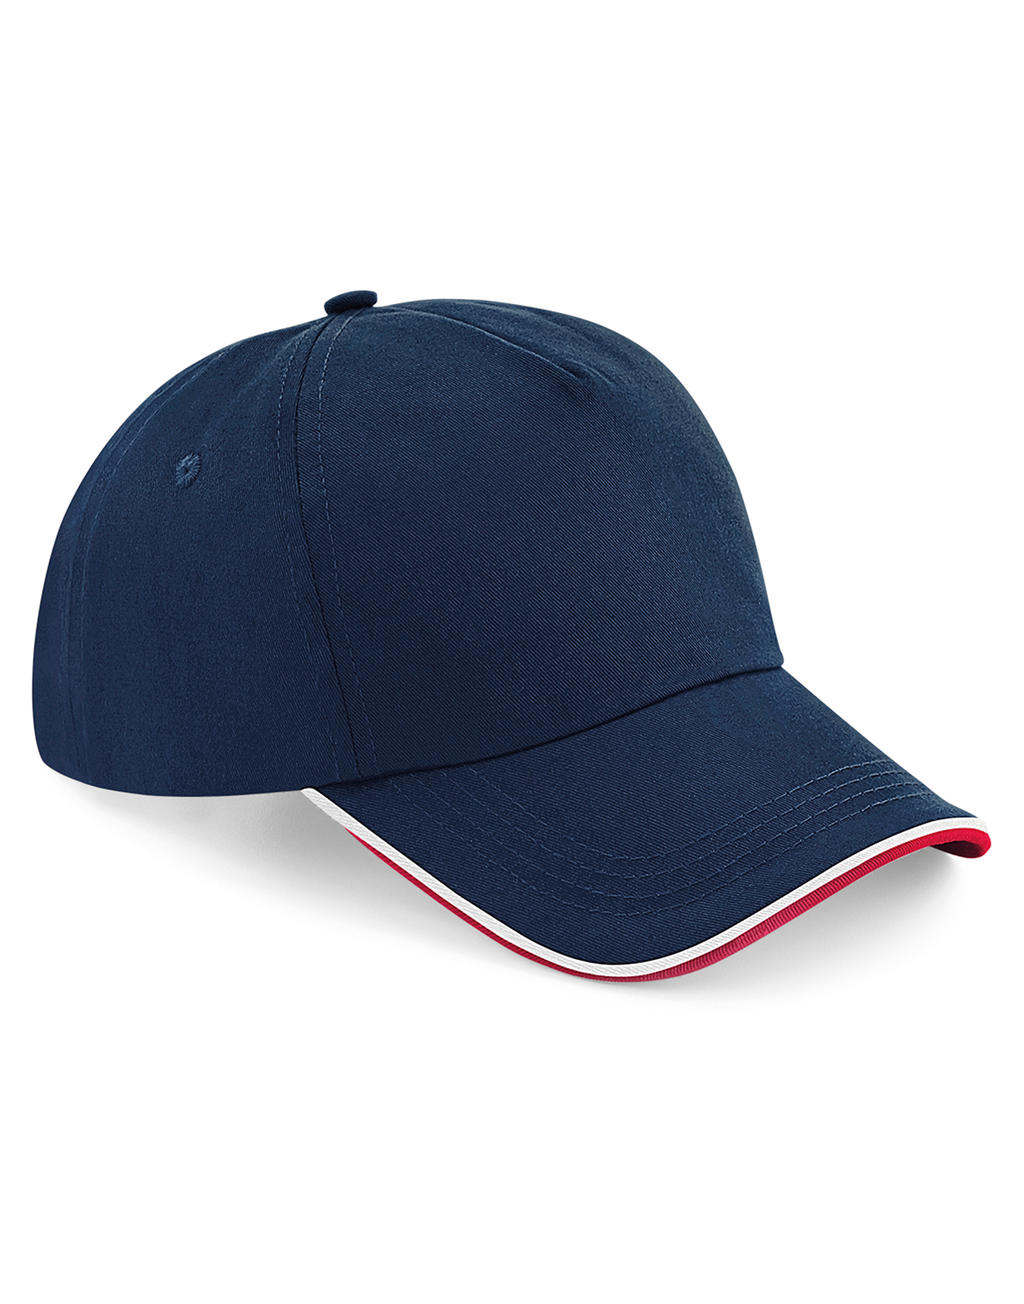  Authentic 5 Panel Cap - Piped Peak in Farbe White/French Navy